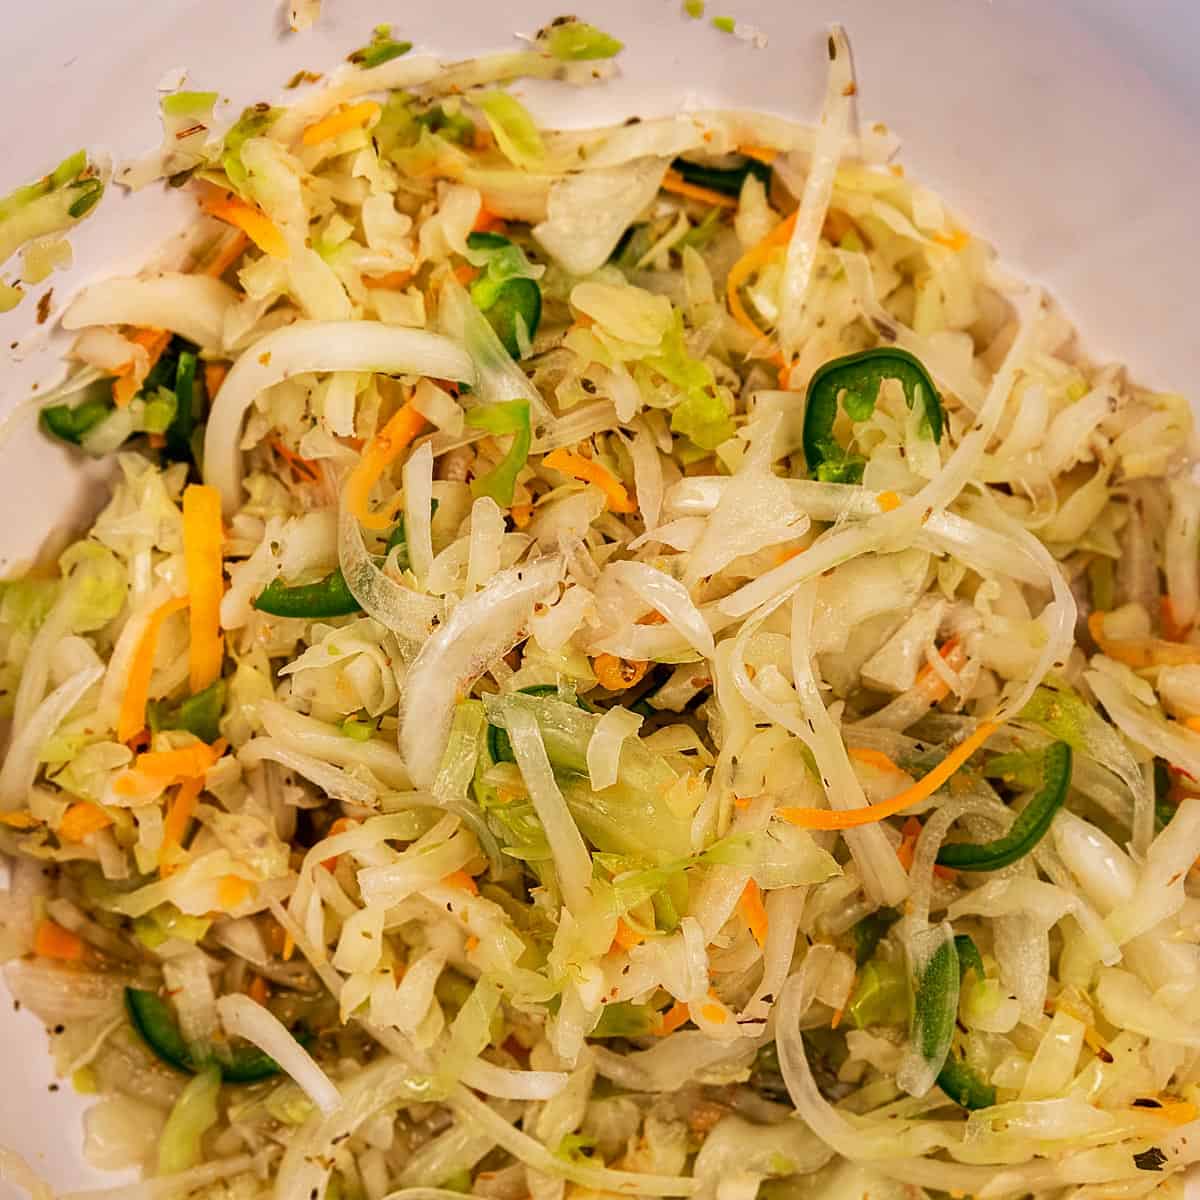 Cabbage, carrots, onions, and jalapenos marinating in vinegar.